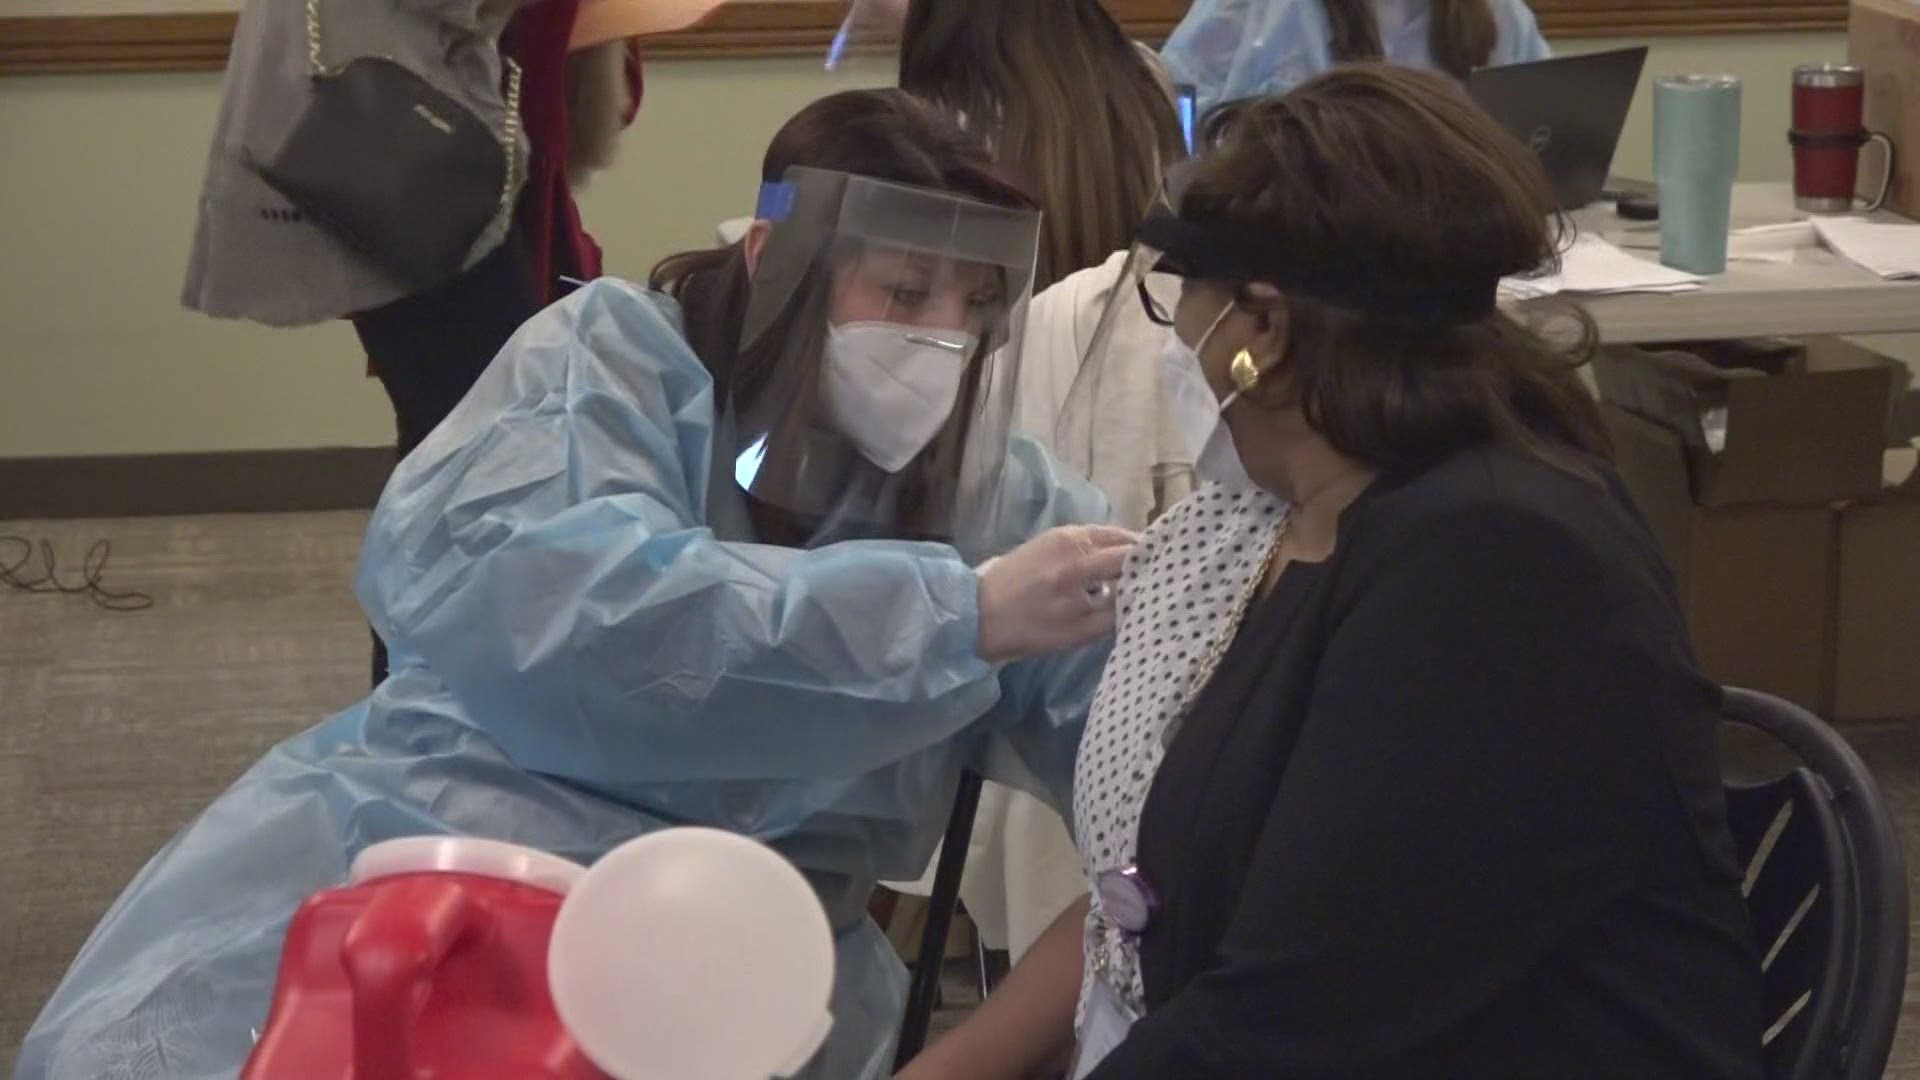 "Today is a revolutionary day," said the Nursing Home Administrator. "Lots of hope."